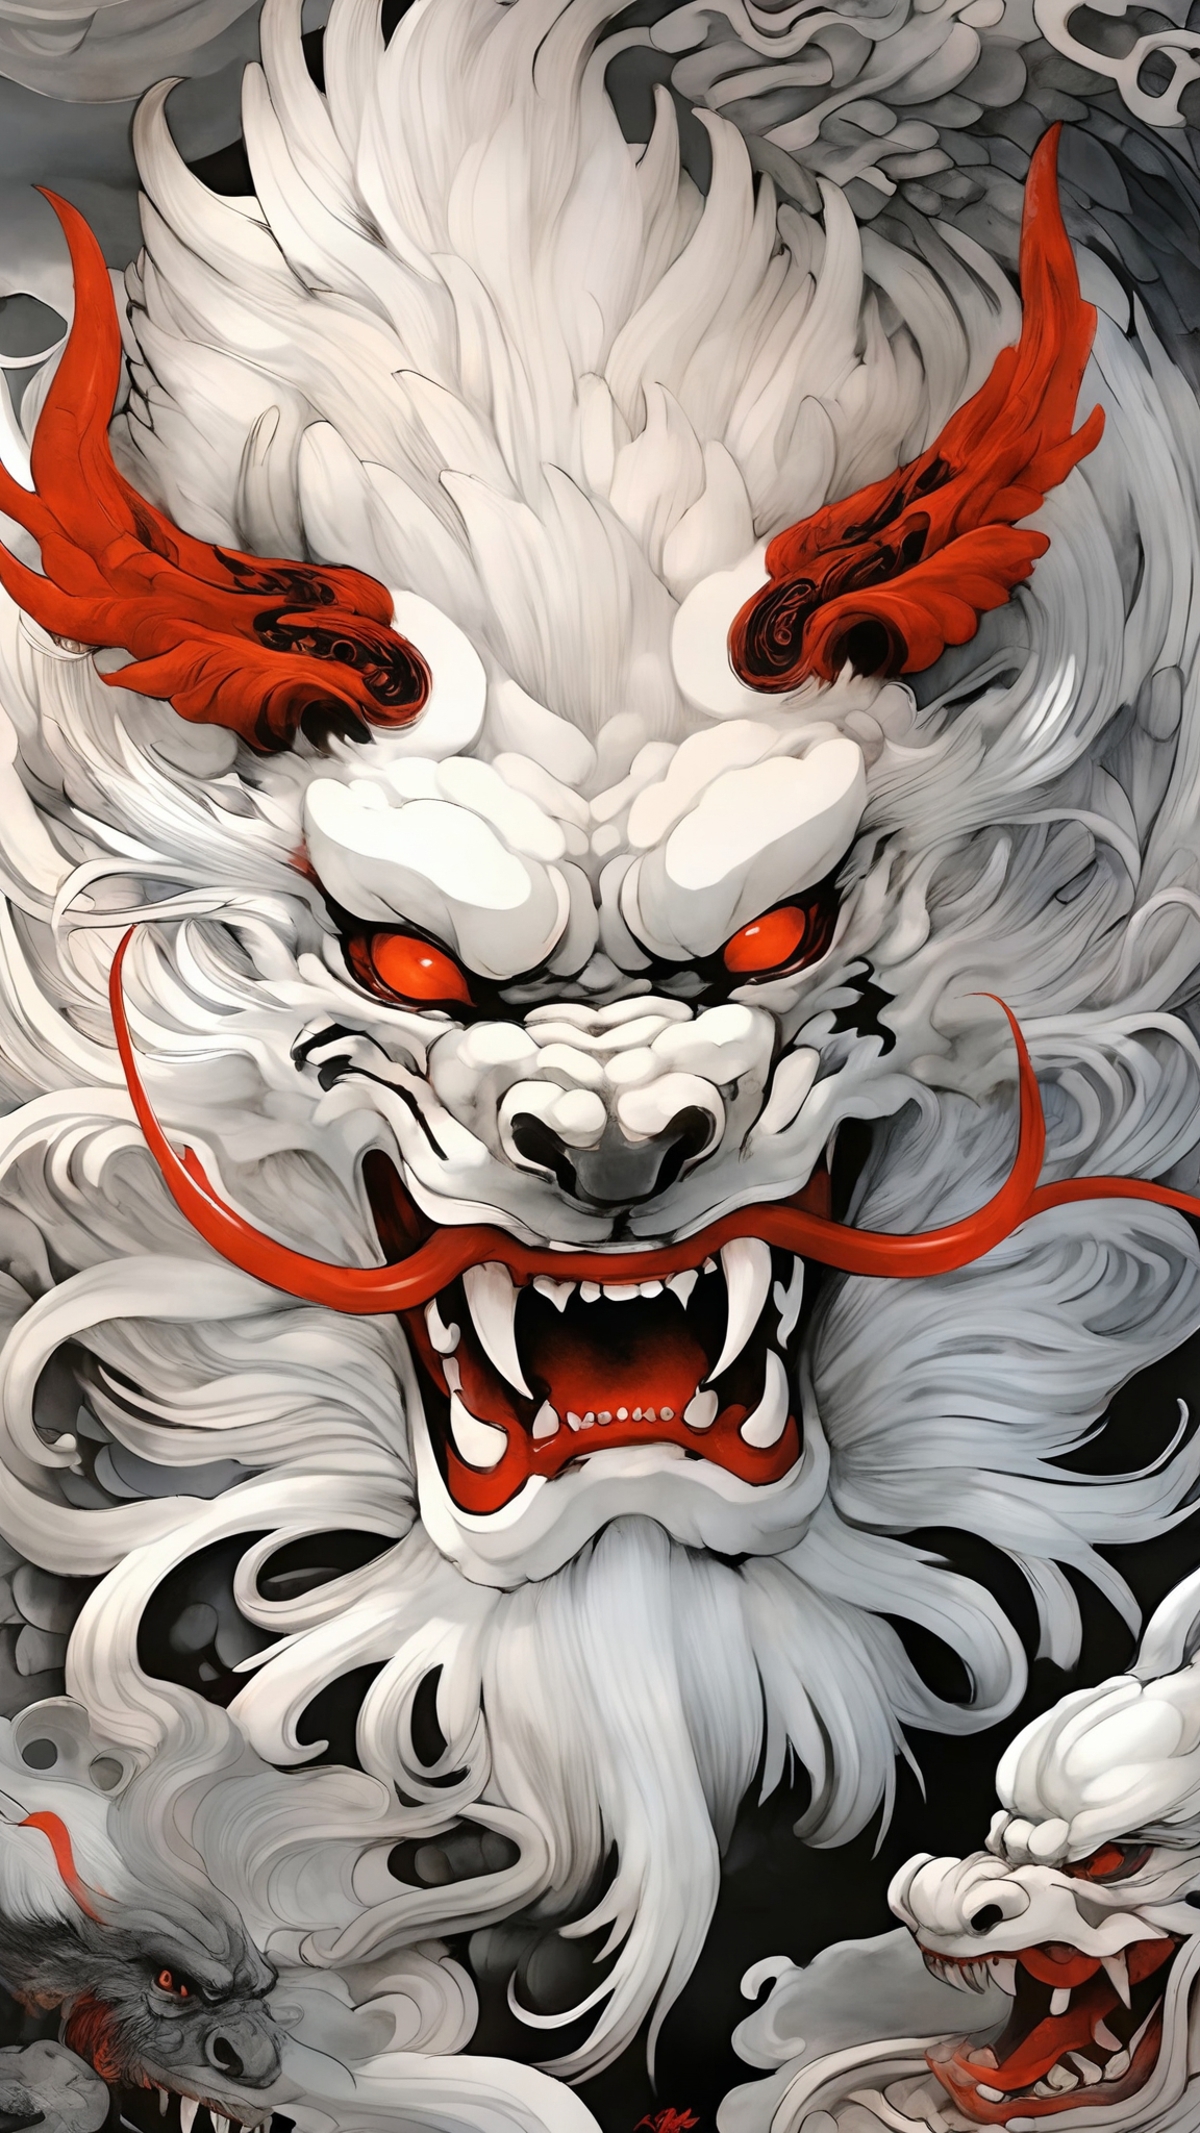 Angry White Dragon with Red Whiskers and Horns - An Illustrated Picture